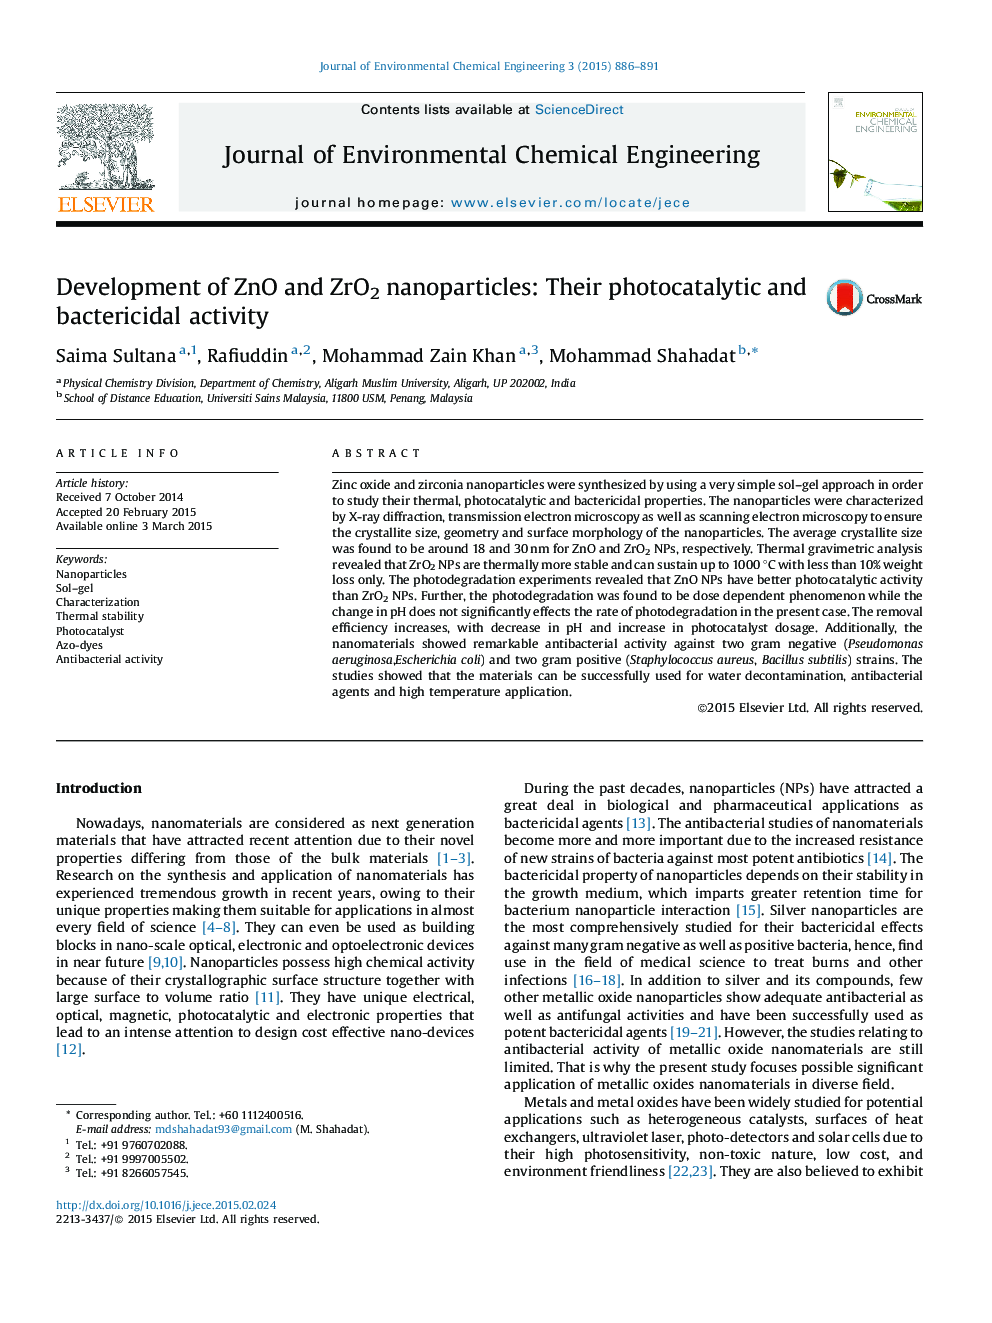 Development of ZnO and ZrO2 nanoparticles: Their photocatalytic and bactericidal activity